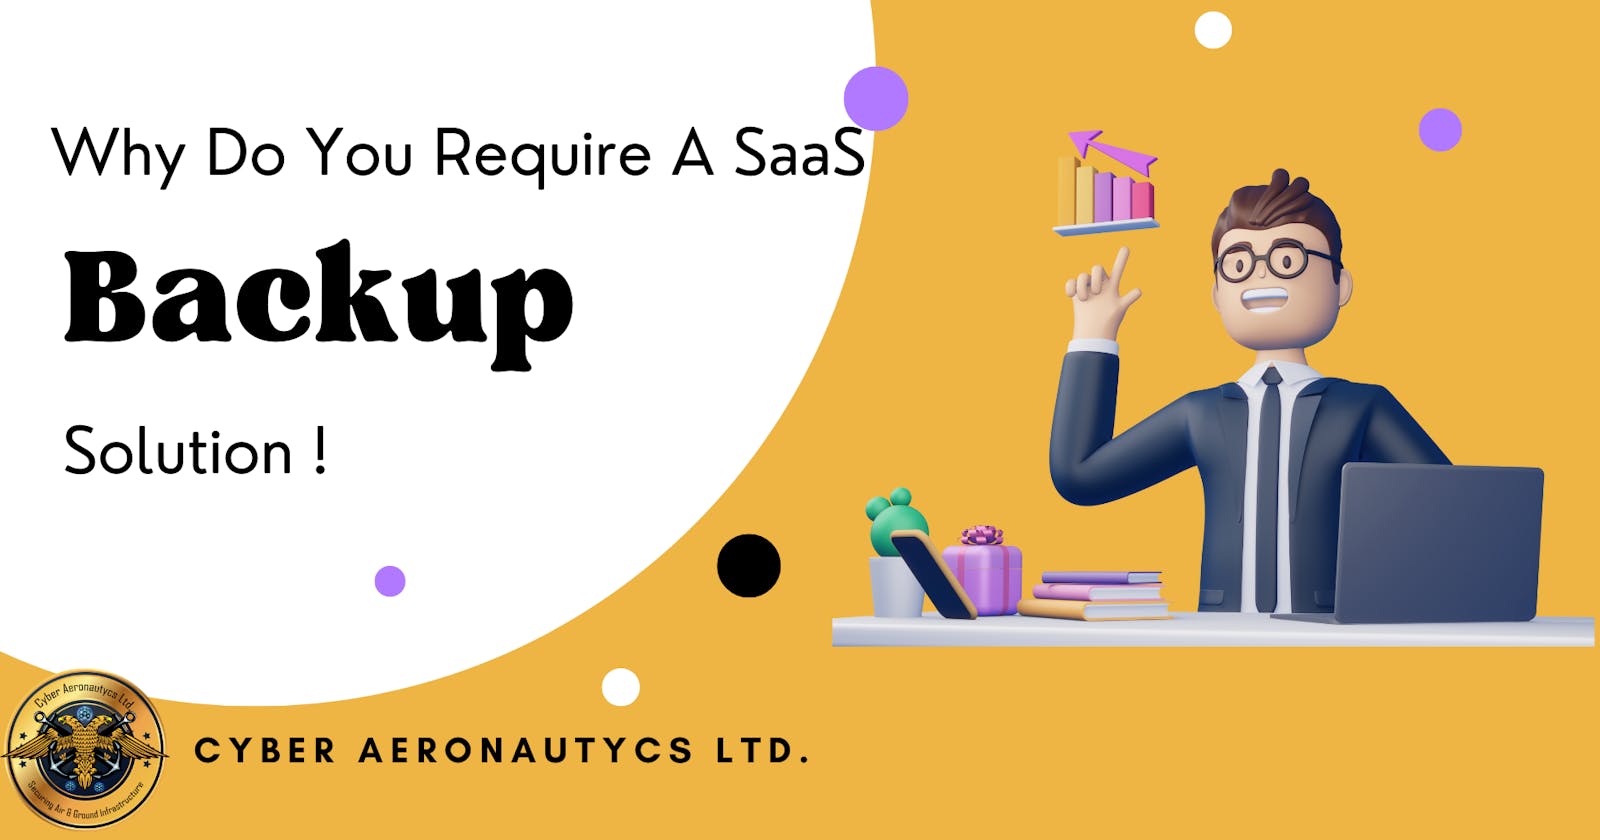 Why do you require a SaaS backup solution?